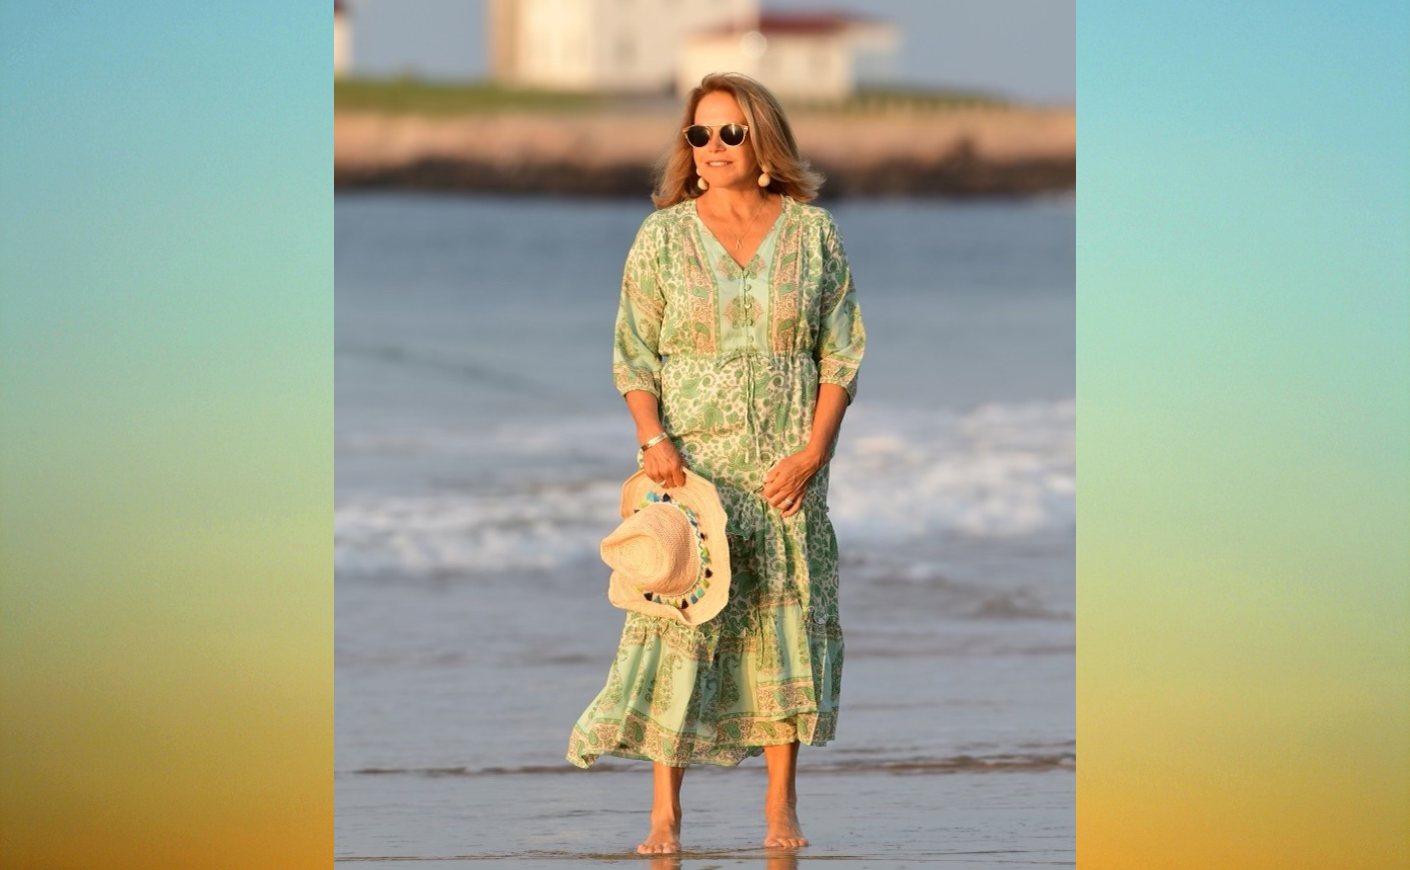 katie couric on the beach